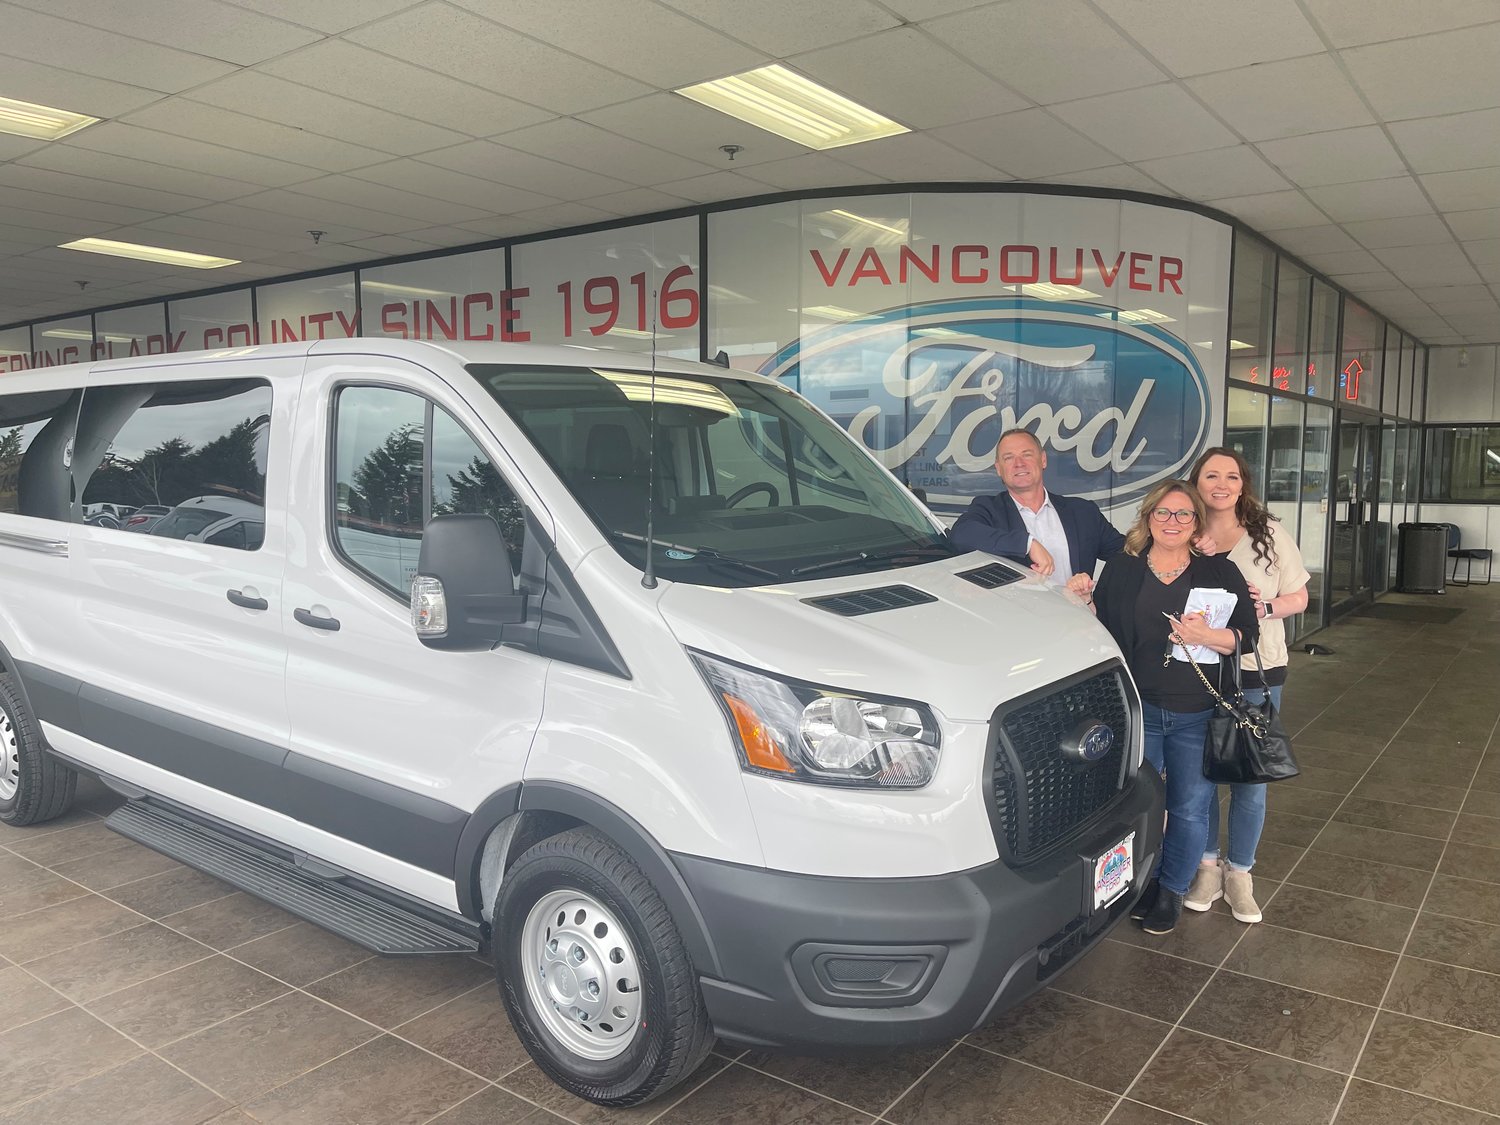 From left to right, Monte Phillips, Marcy Sprecher, and Jessica Rudisill stand next to one of the Rocksolid Teen Community Center’s new vans at Vancouver Ford.